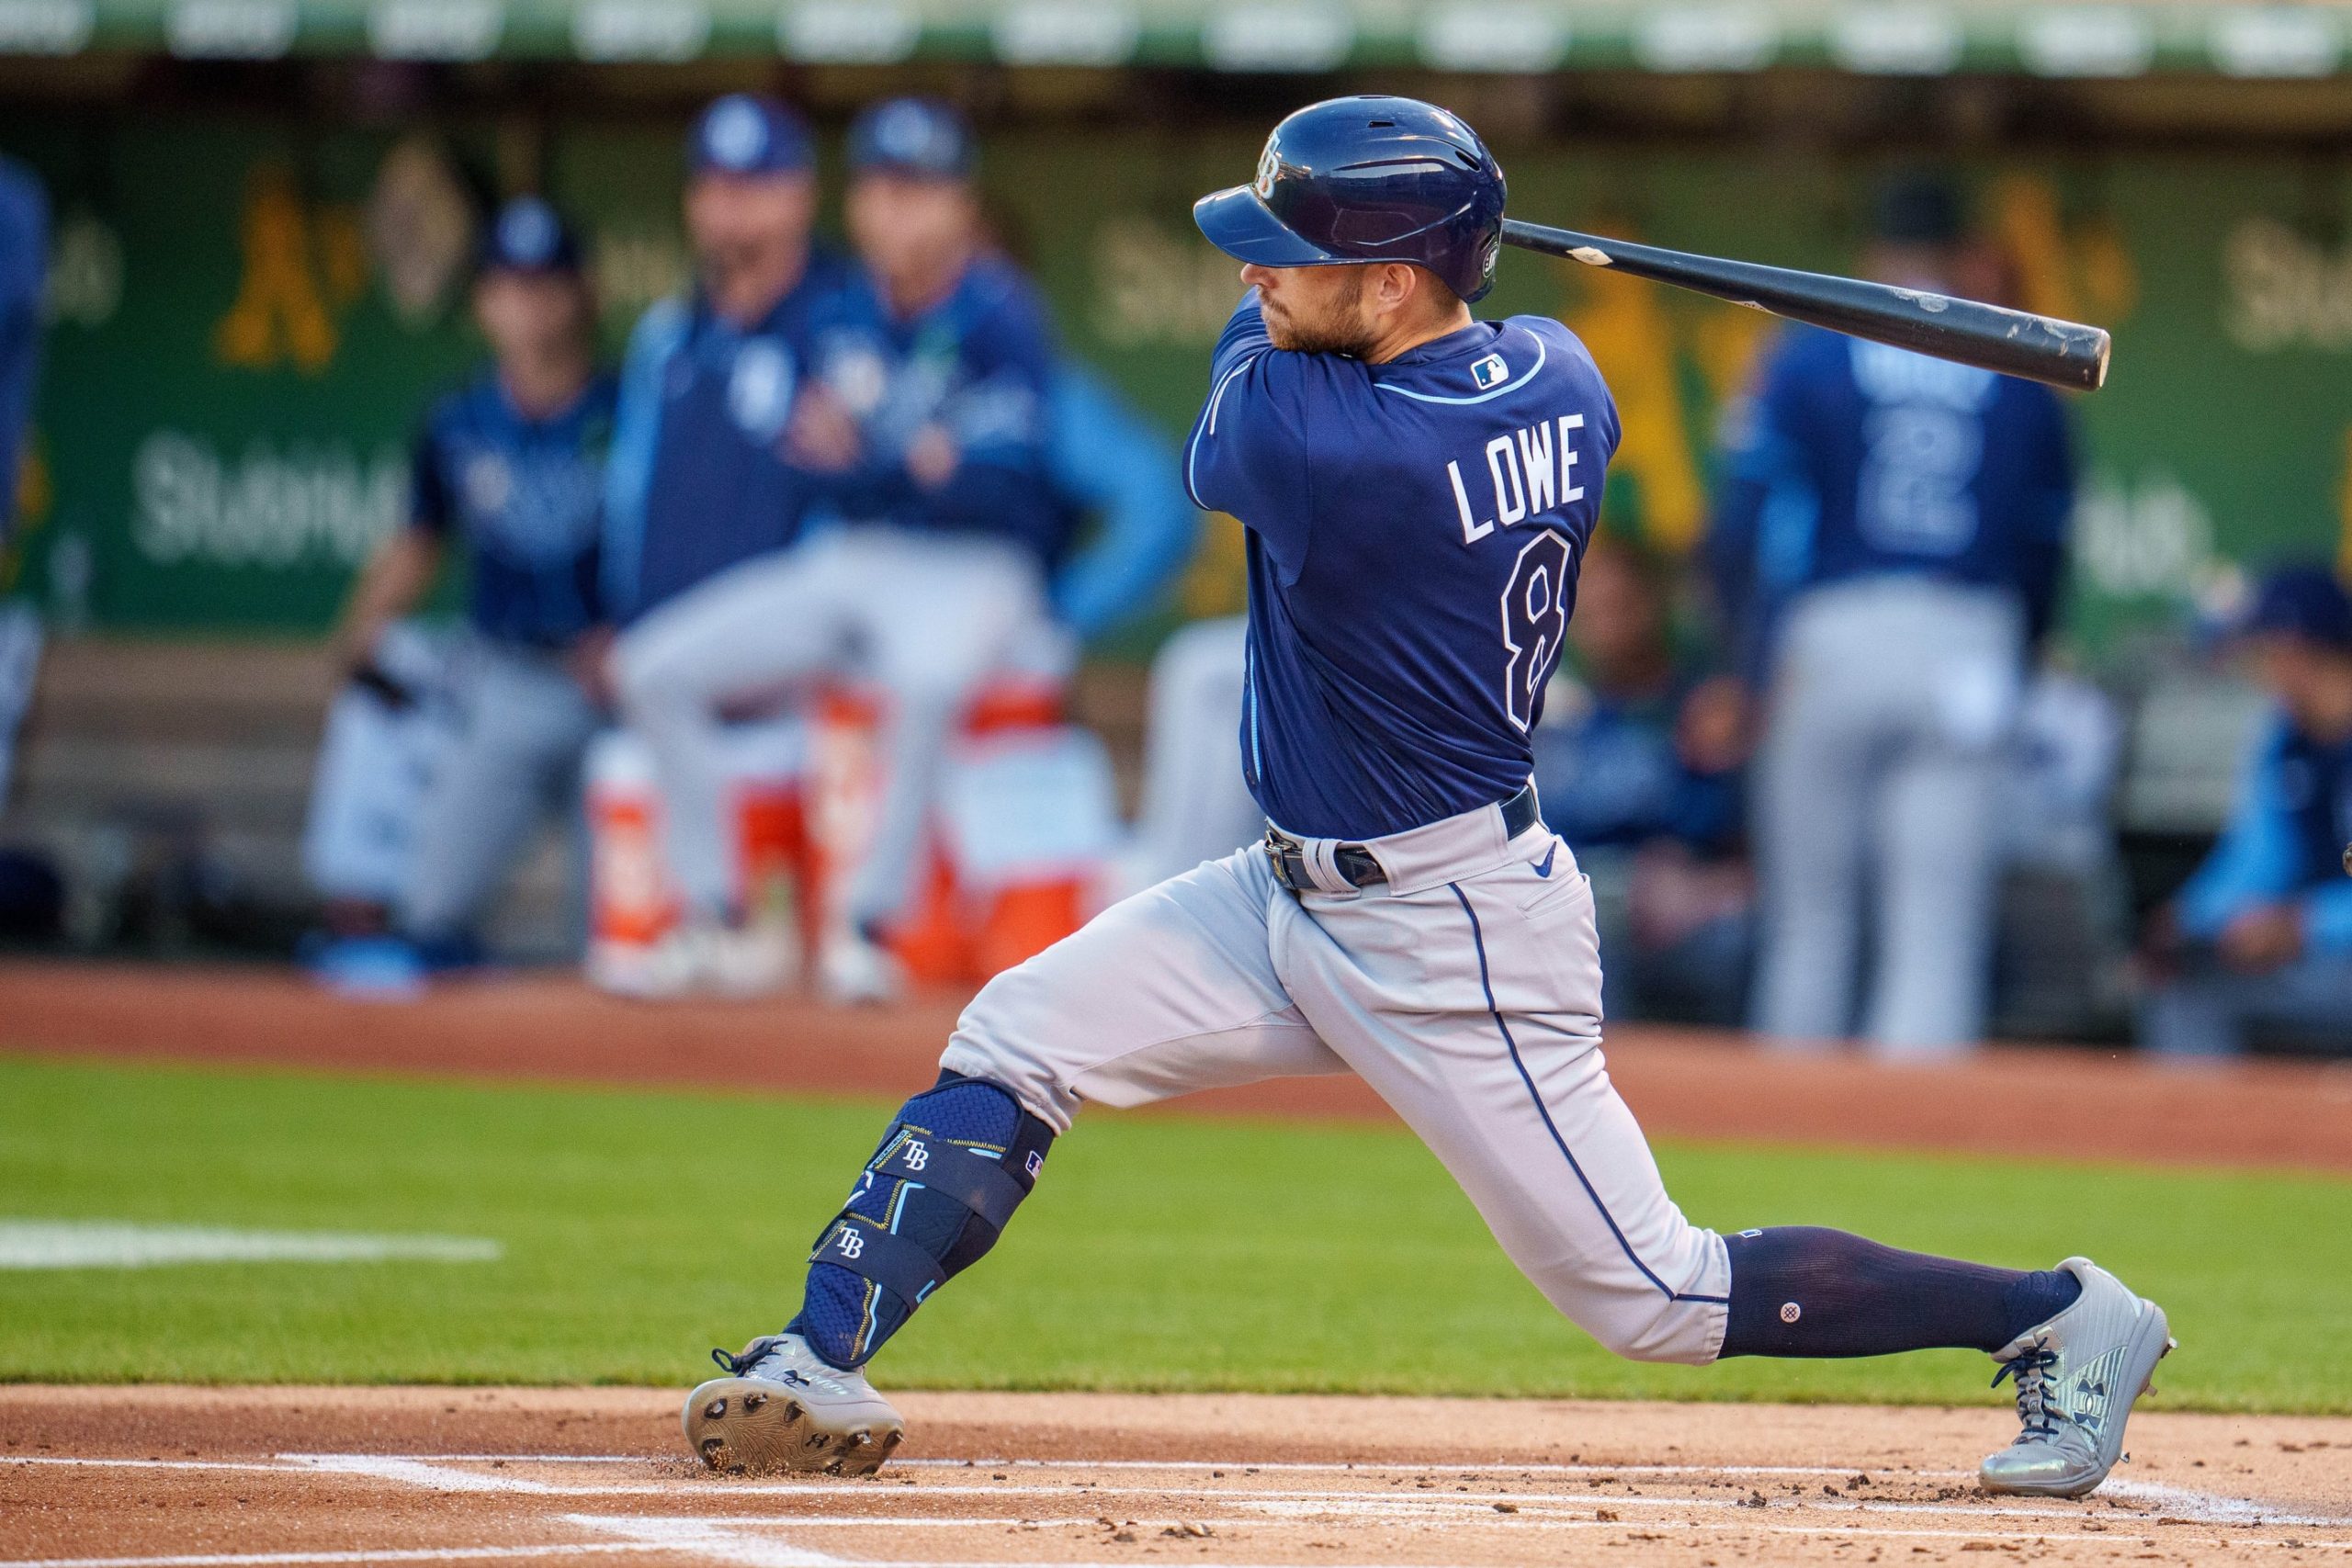 MLB Rays vs Orioles same game parlay today 7/28 (+425)